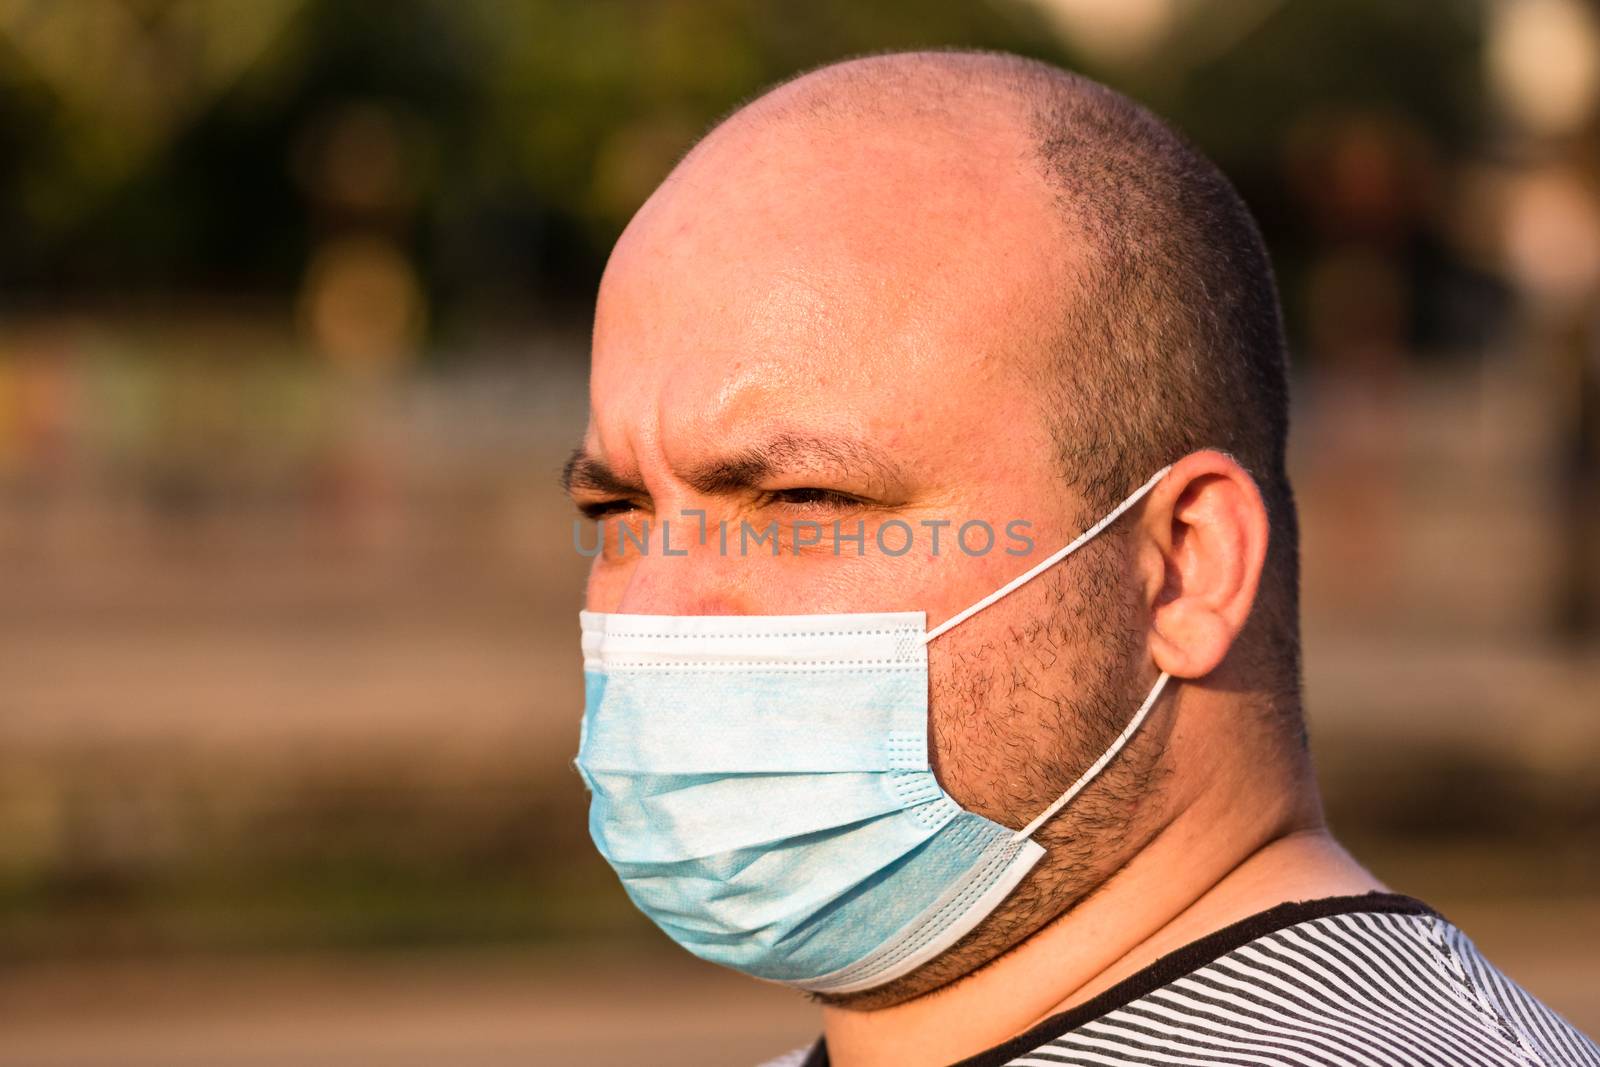 Young man with medical protective face mask illustrates pandemic coronavirus disease on blurred background. SARS-CoV-2 outbreak in Europe. Changes and complications caused by epidemic